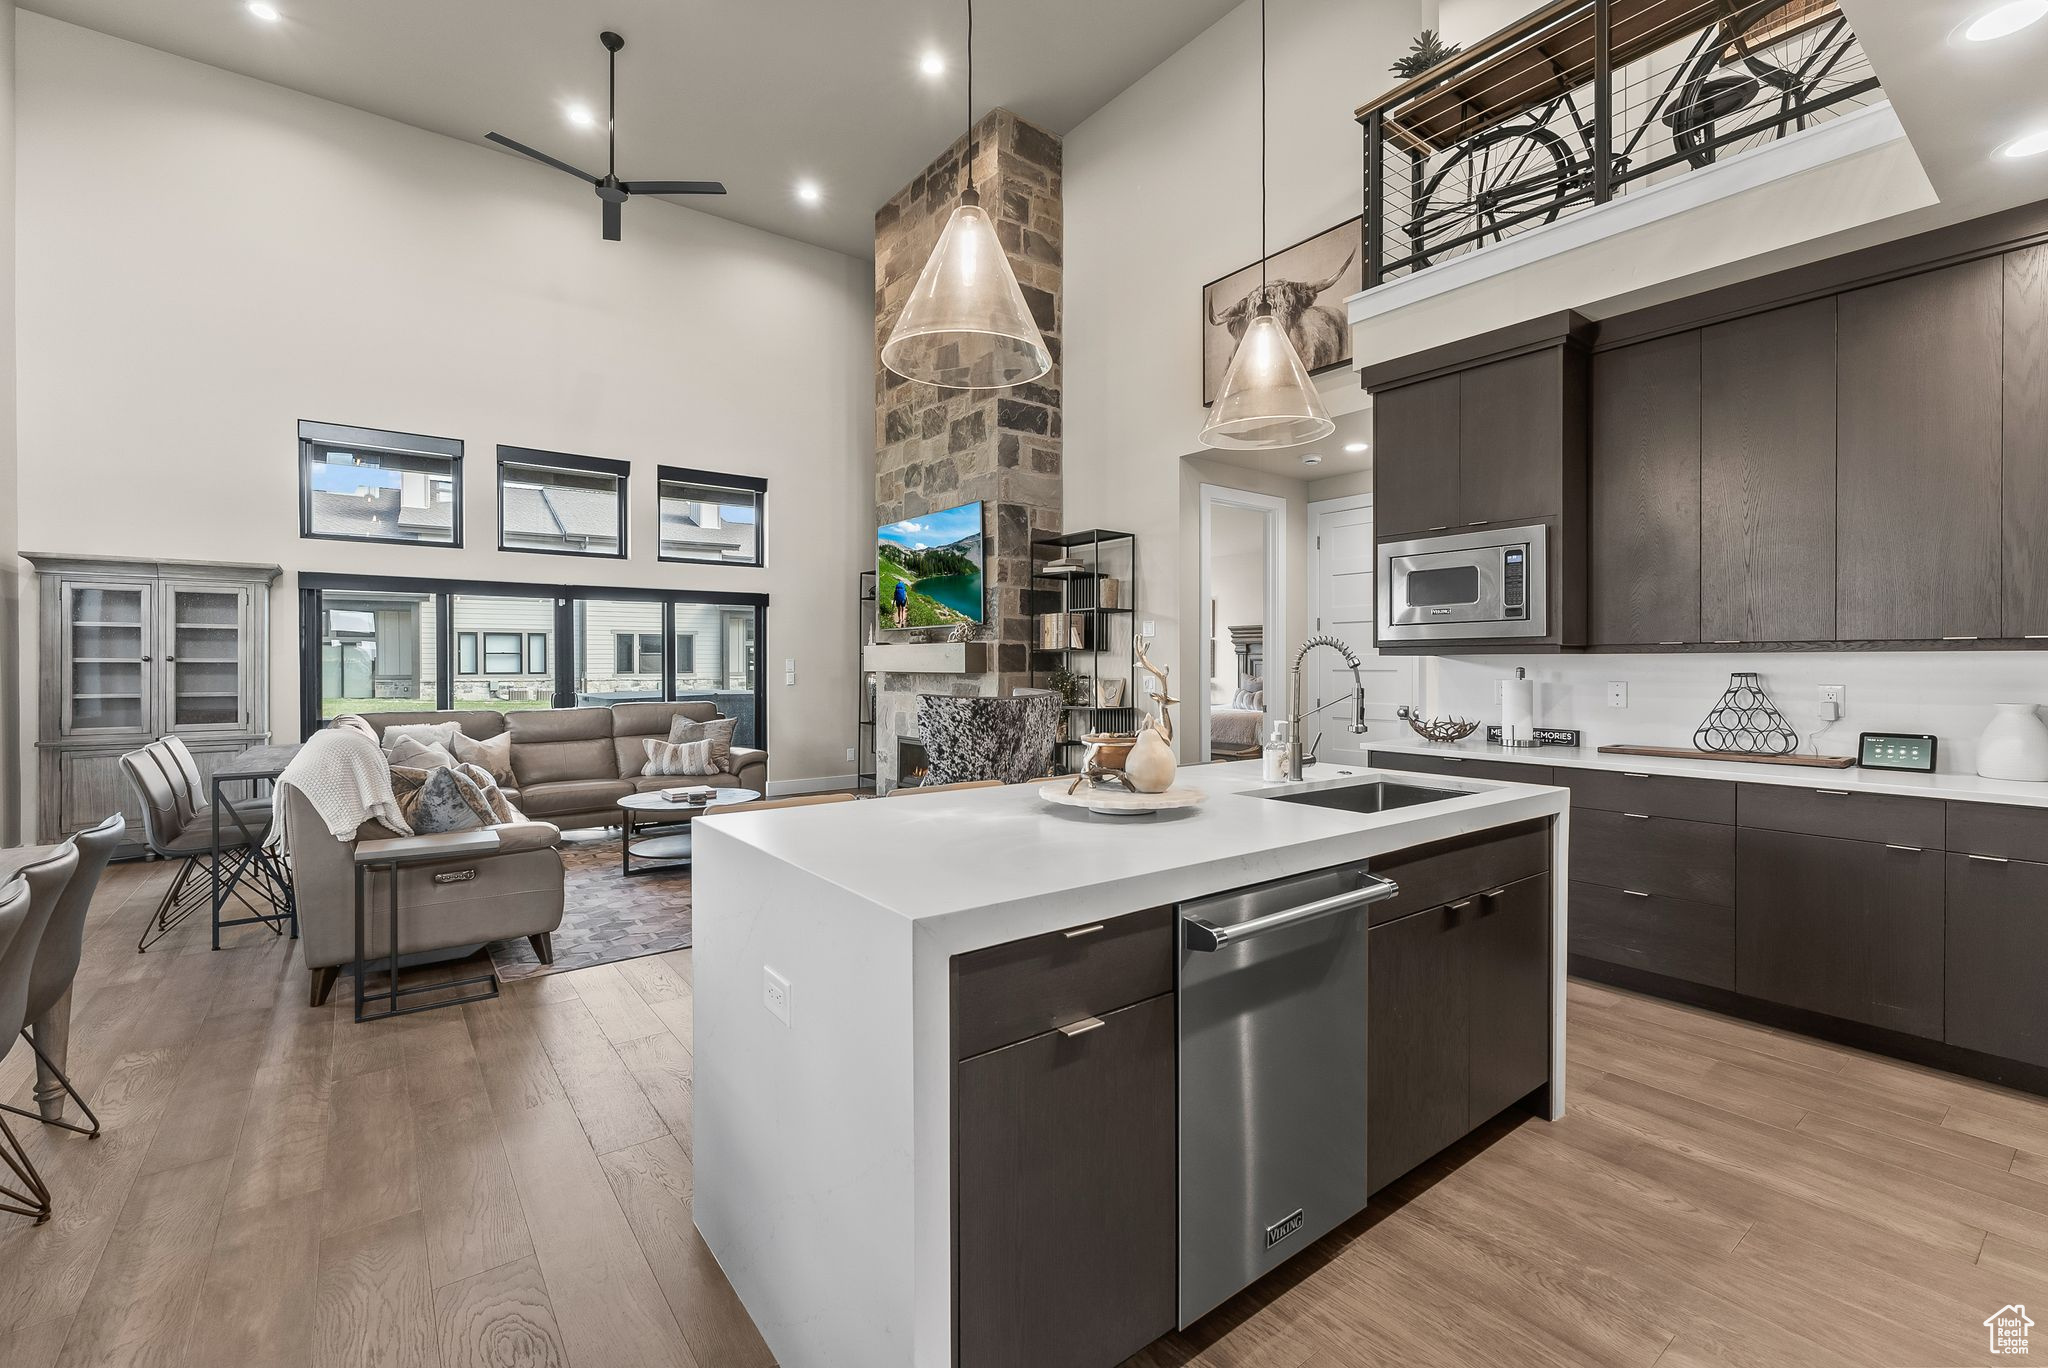 Kitchen with hanging light fixtures, a high ceiling, stainless steel appliances, light hardwood / wood-style flooring, and a kitchen island with sink